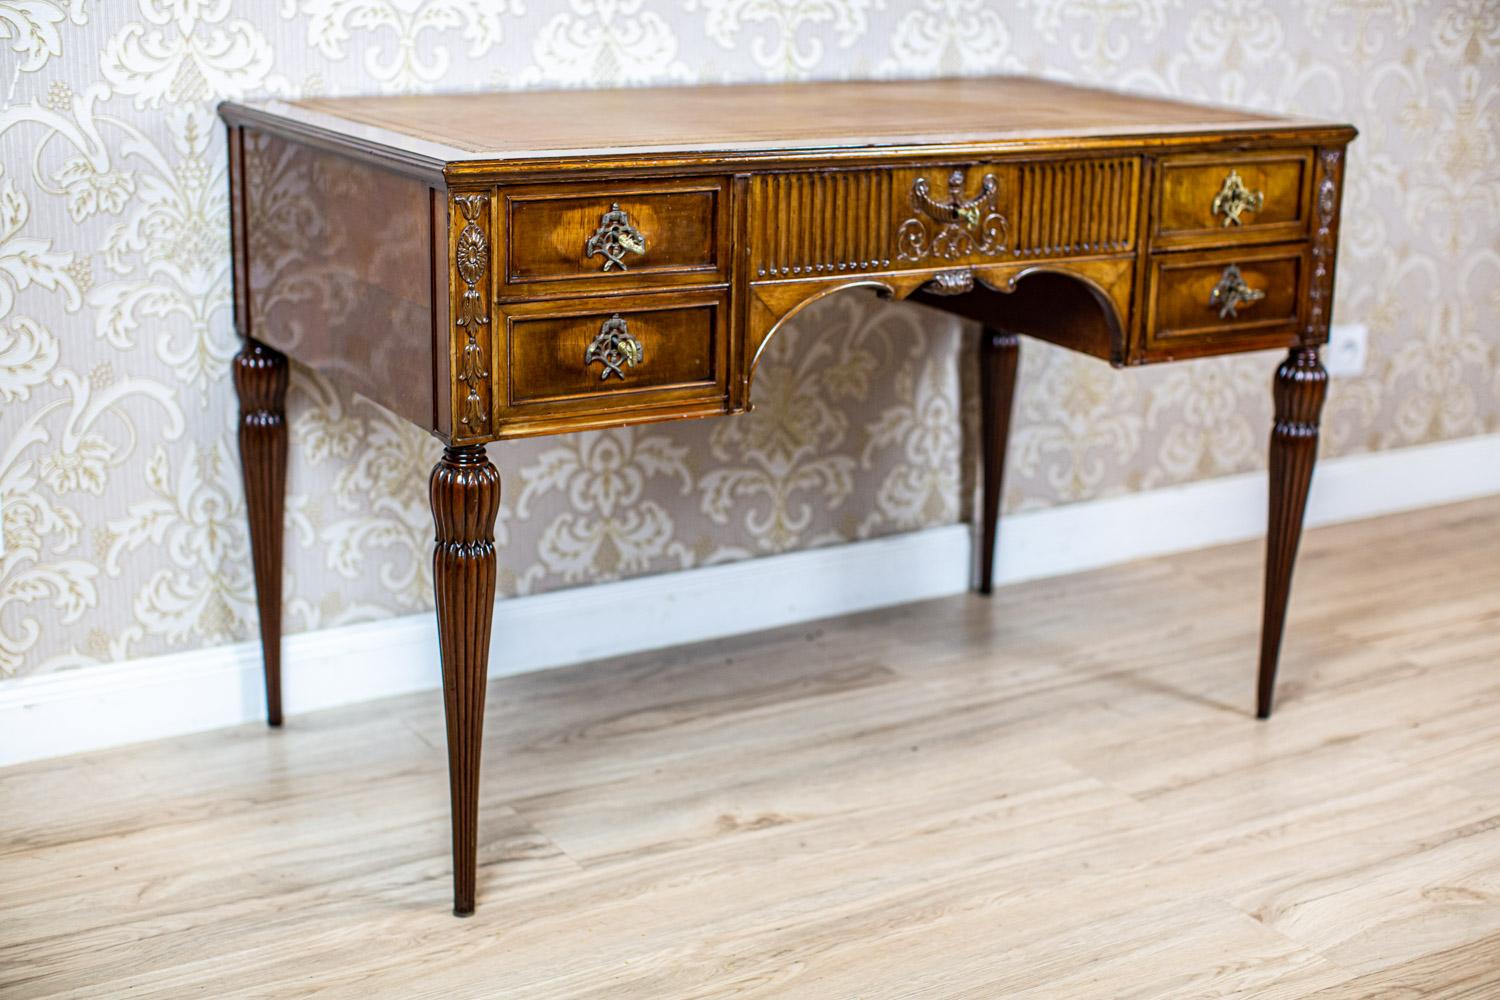 Lady's Mahogany Desk from the Late 19th Century in Brass Details

We present you this piece of furniture on high legs, with a row of drawers on both sides, which are divided in the middle by a drawer under the top.
The side drawers have brass